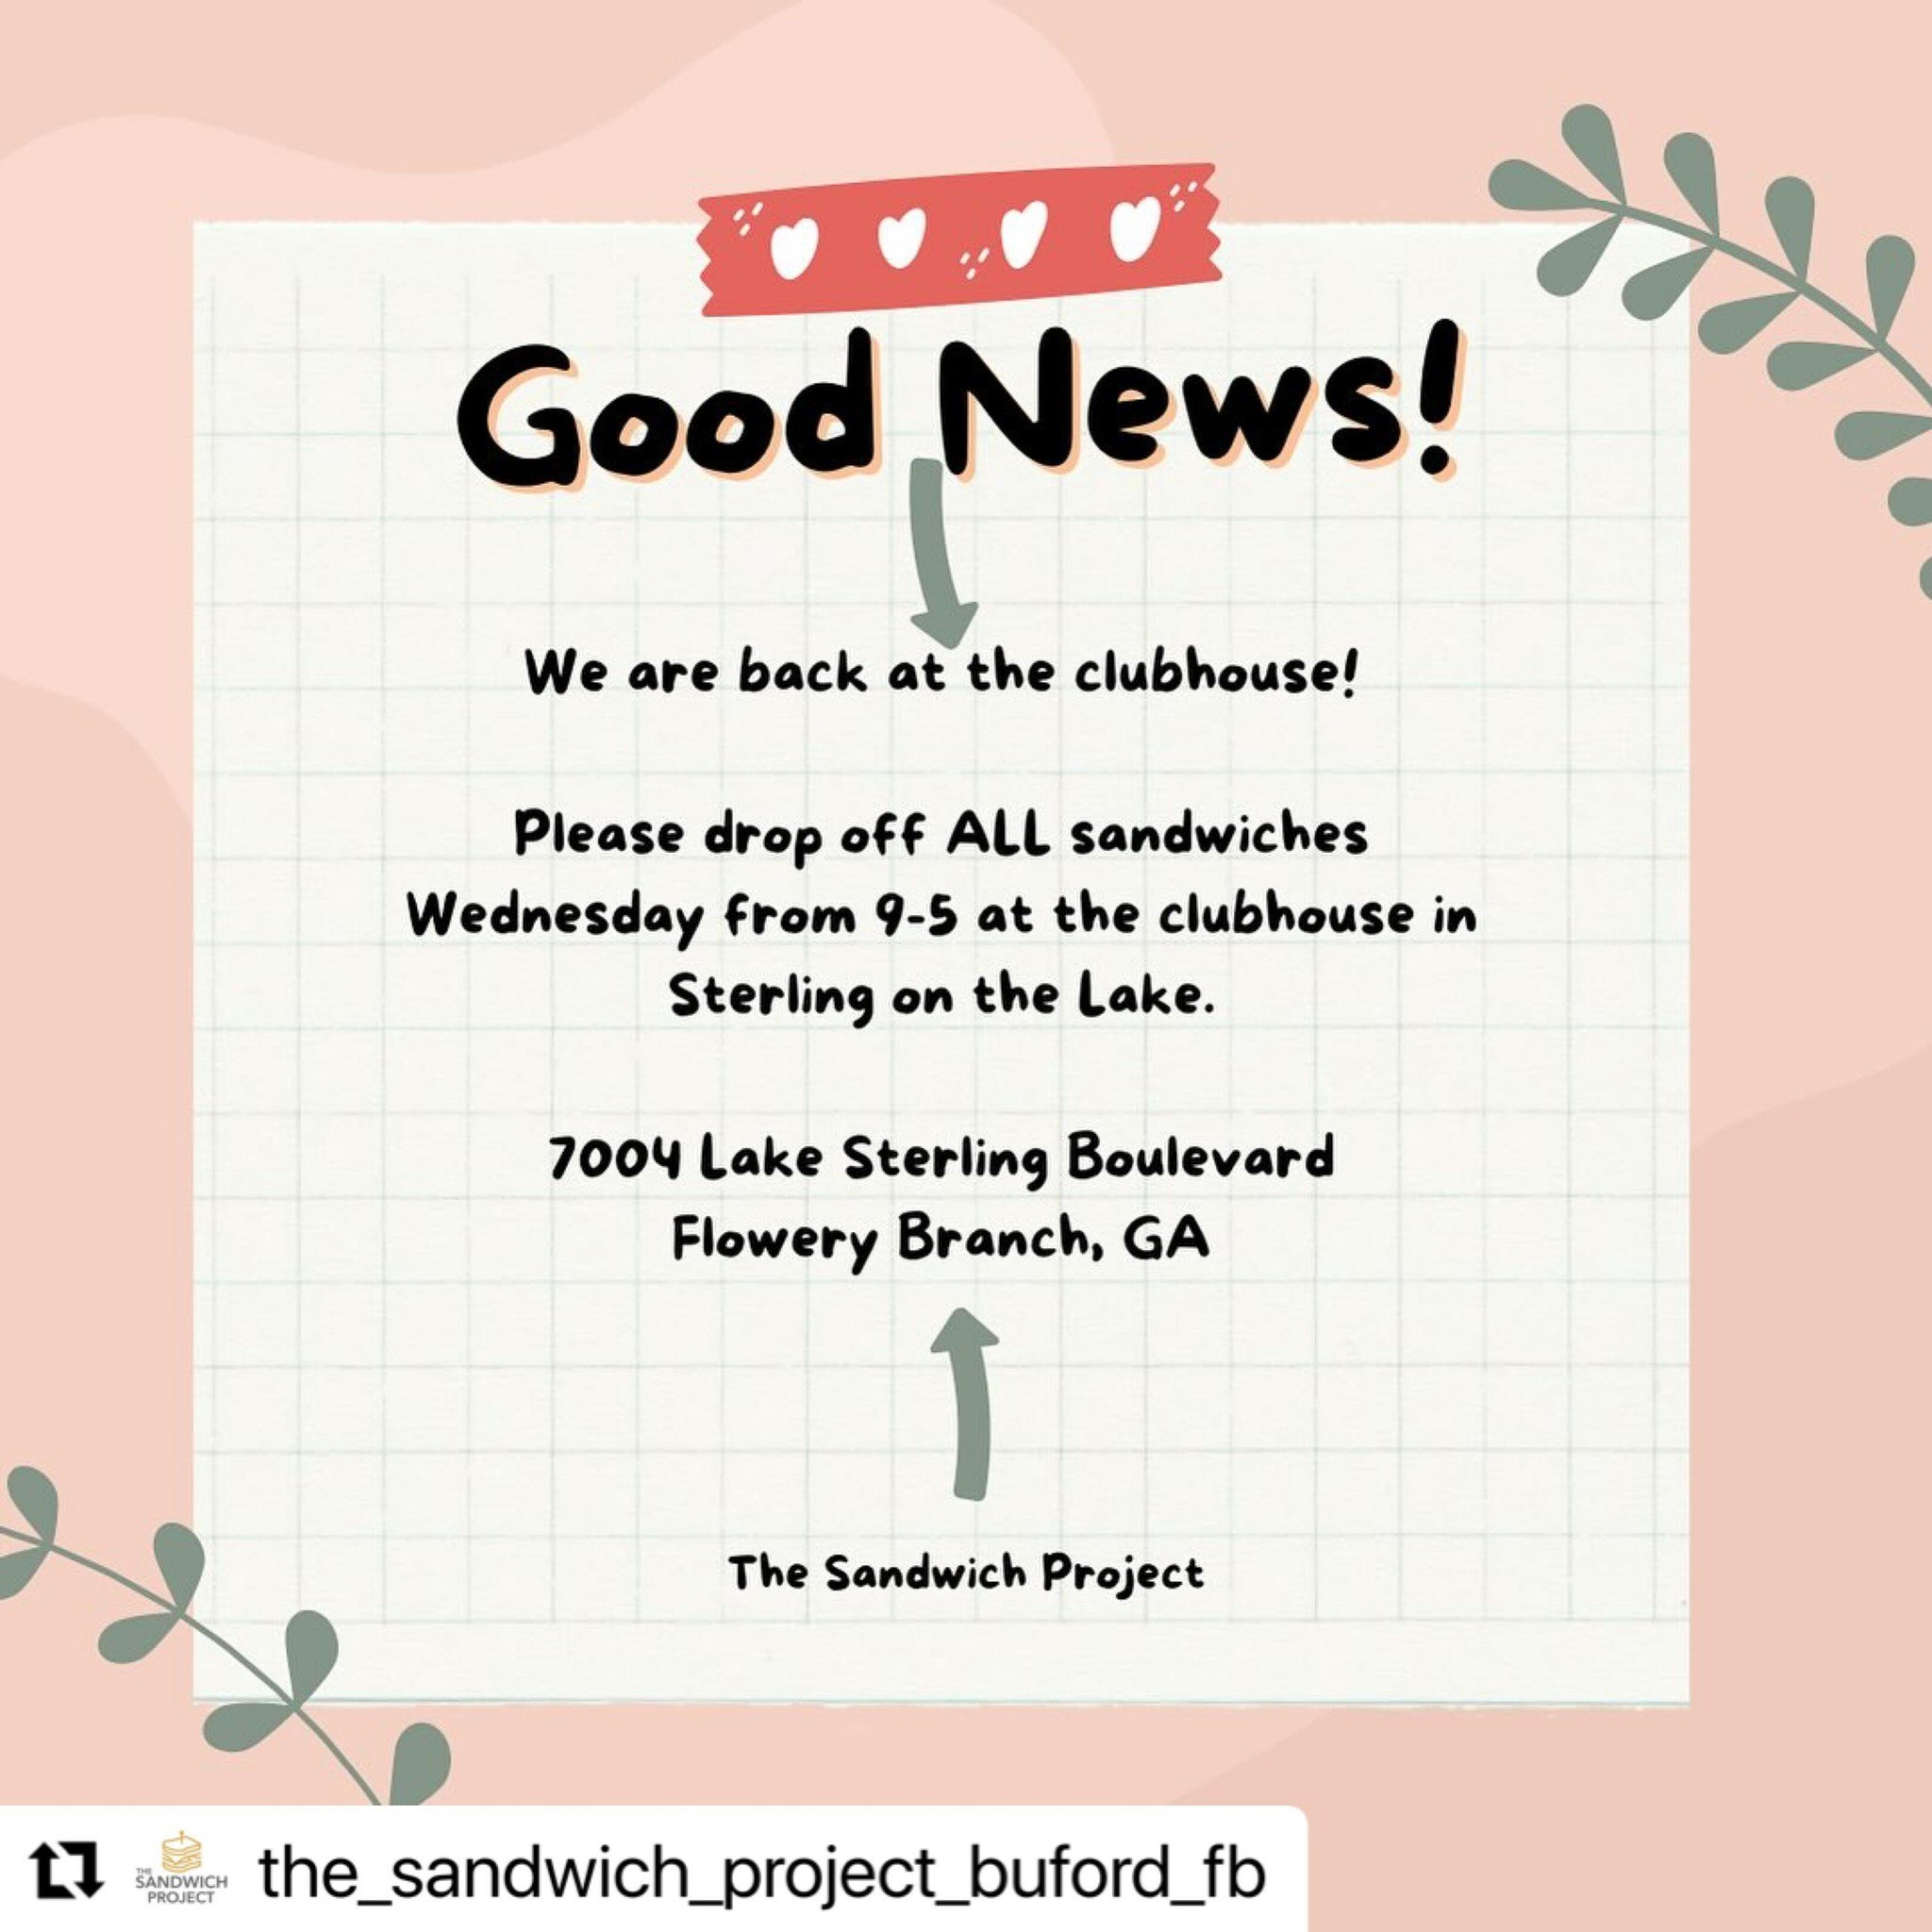 Attention Flowery Branch sandwich-makers!

#Repost @the_sandwich_project_buford_fb
・・・
Good news! We are back at the original clubhouse in Sterling on the Lake! Please drop off all sandwiches Wednesday from 9-5 pm. Thank you for all the donations! 

